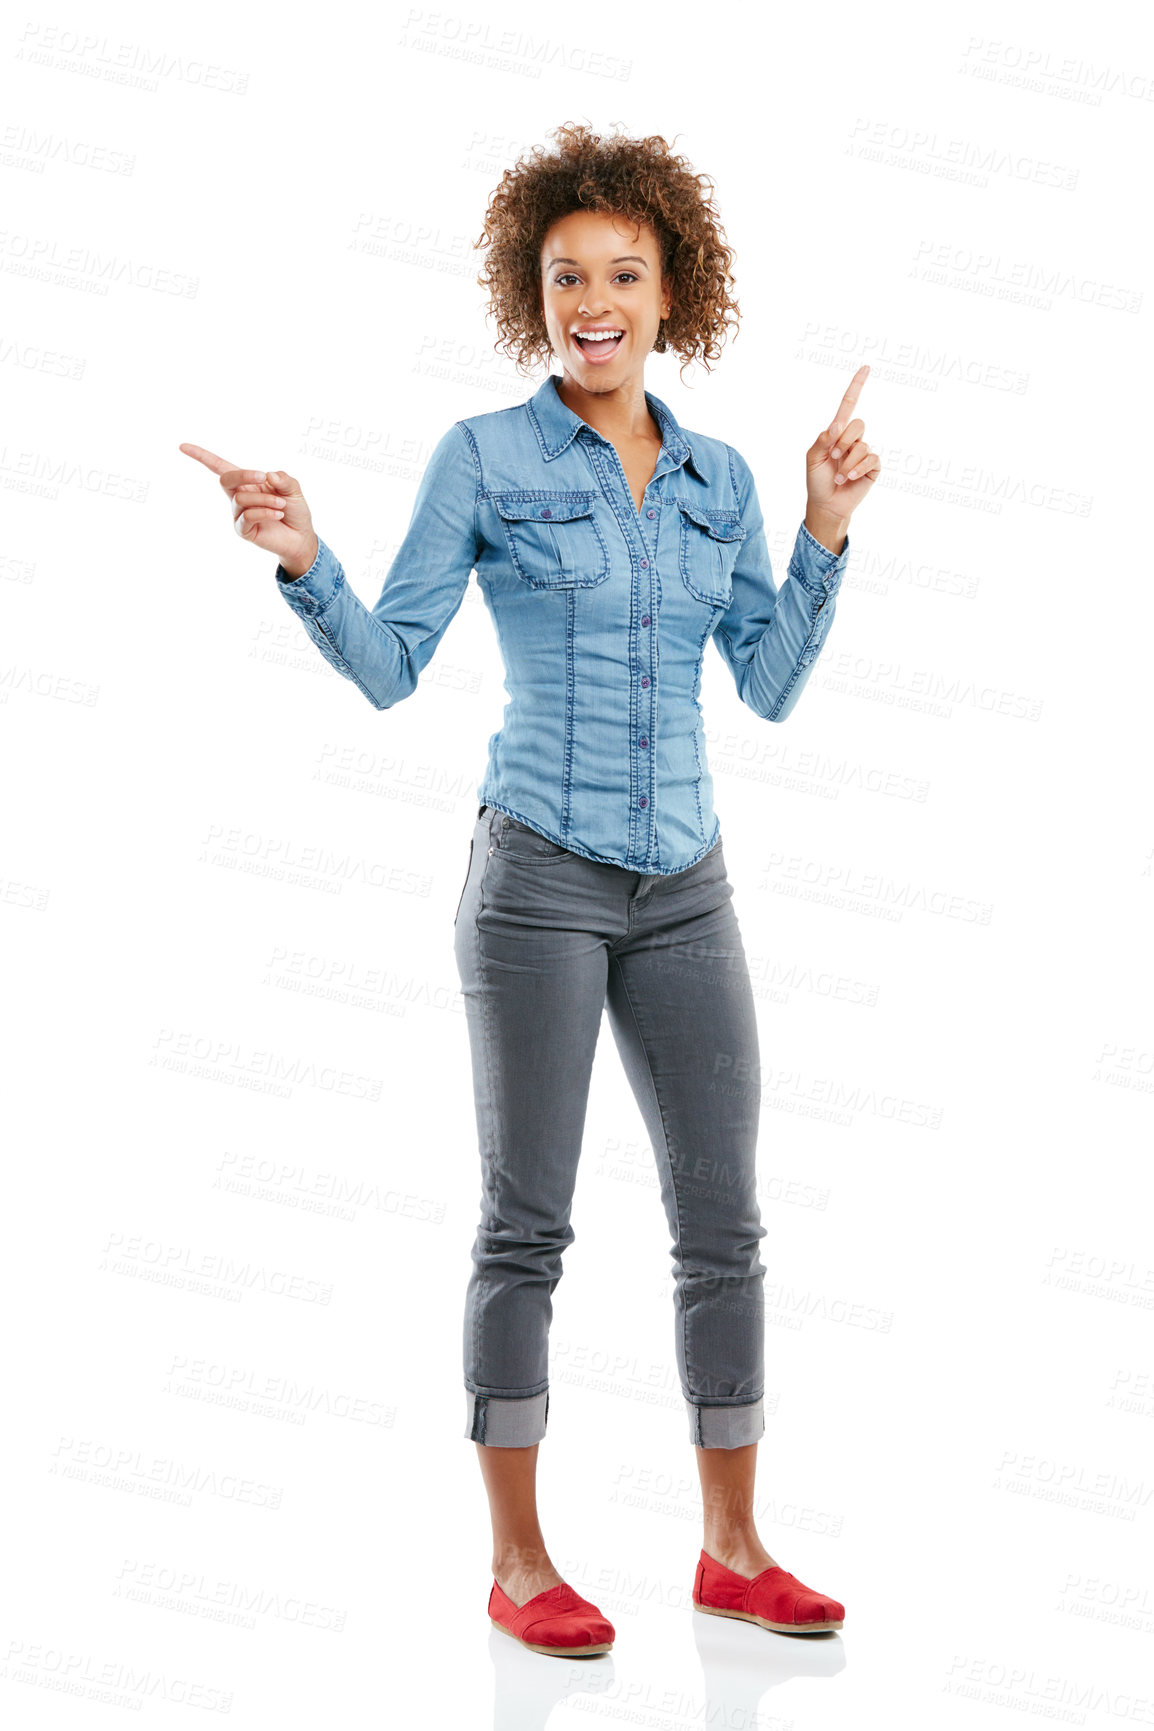 Buy stock photo Studio shot of an attractive young woman pointing in two different directions